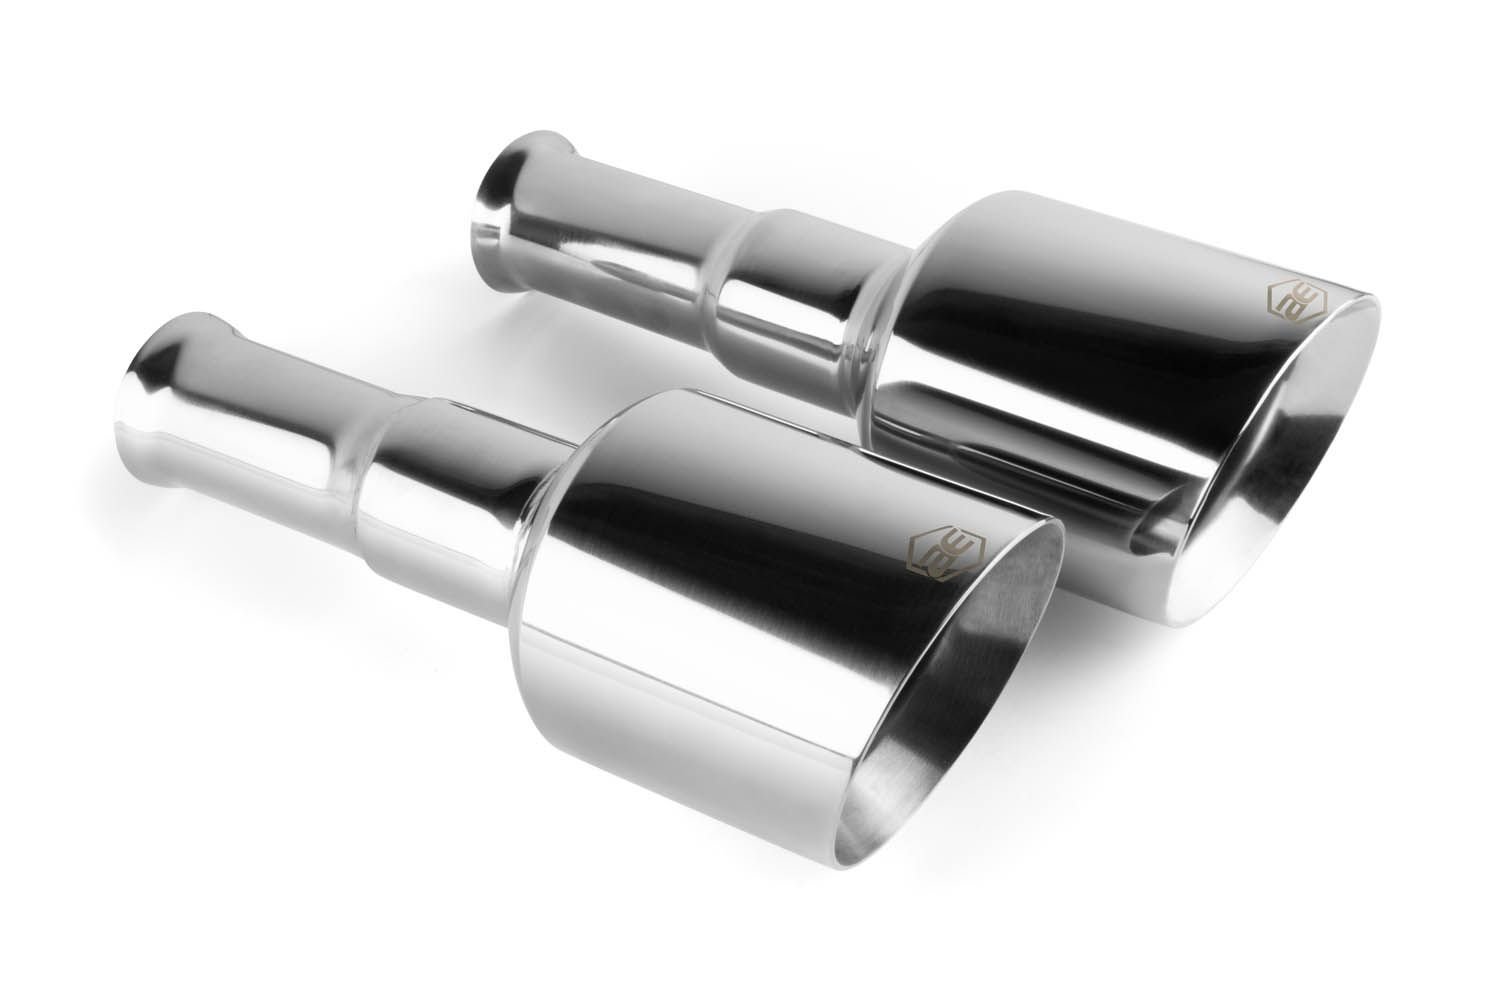 Direct-Fit Exhaust Tip Set fits Select Late-Model Dodge Ram 1500 [Polished Finish]